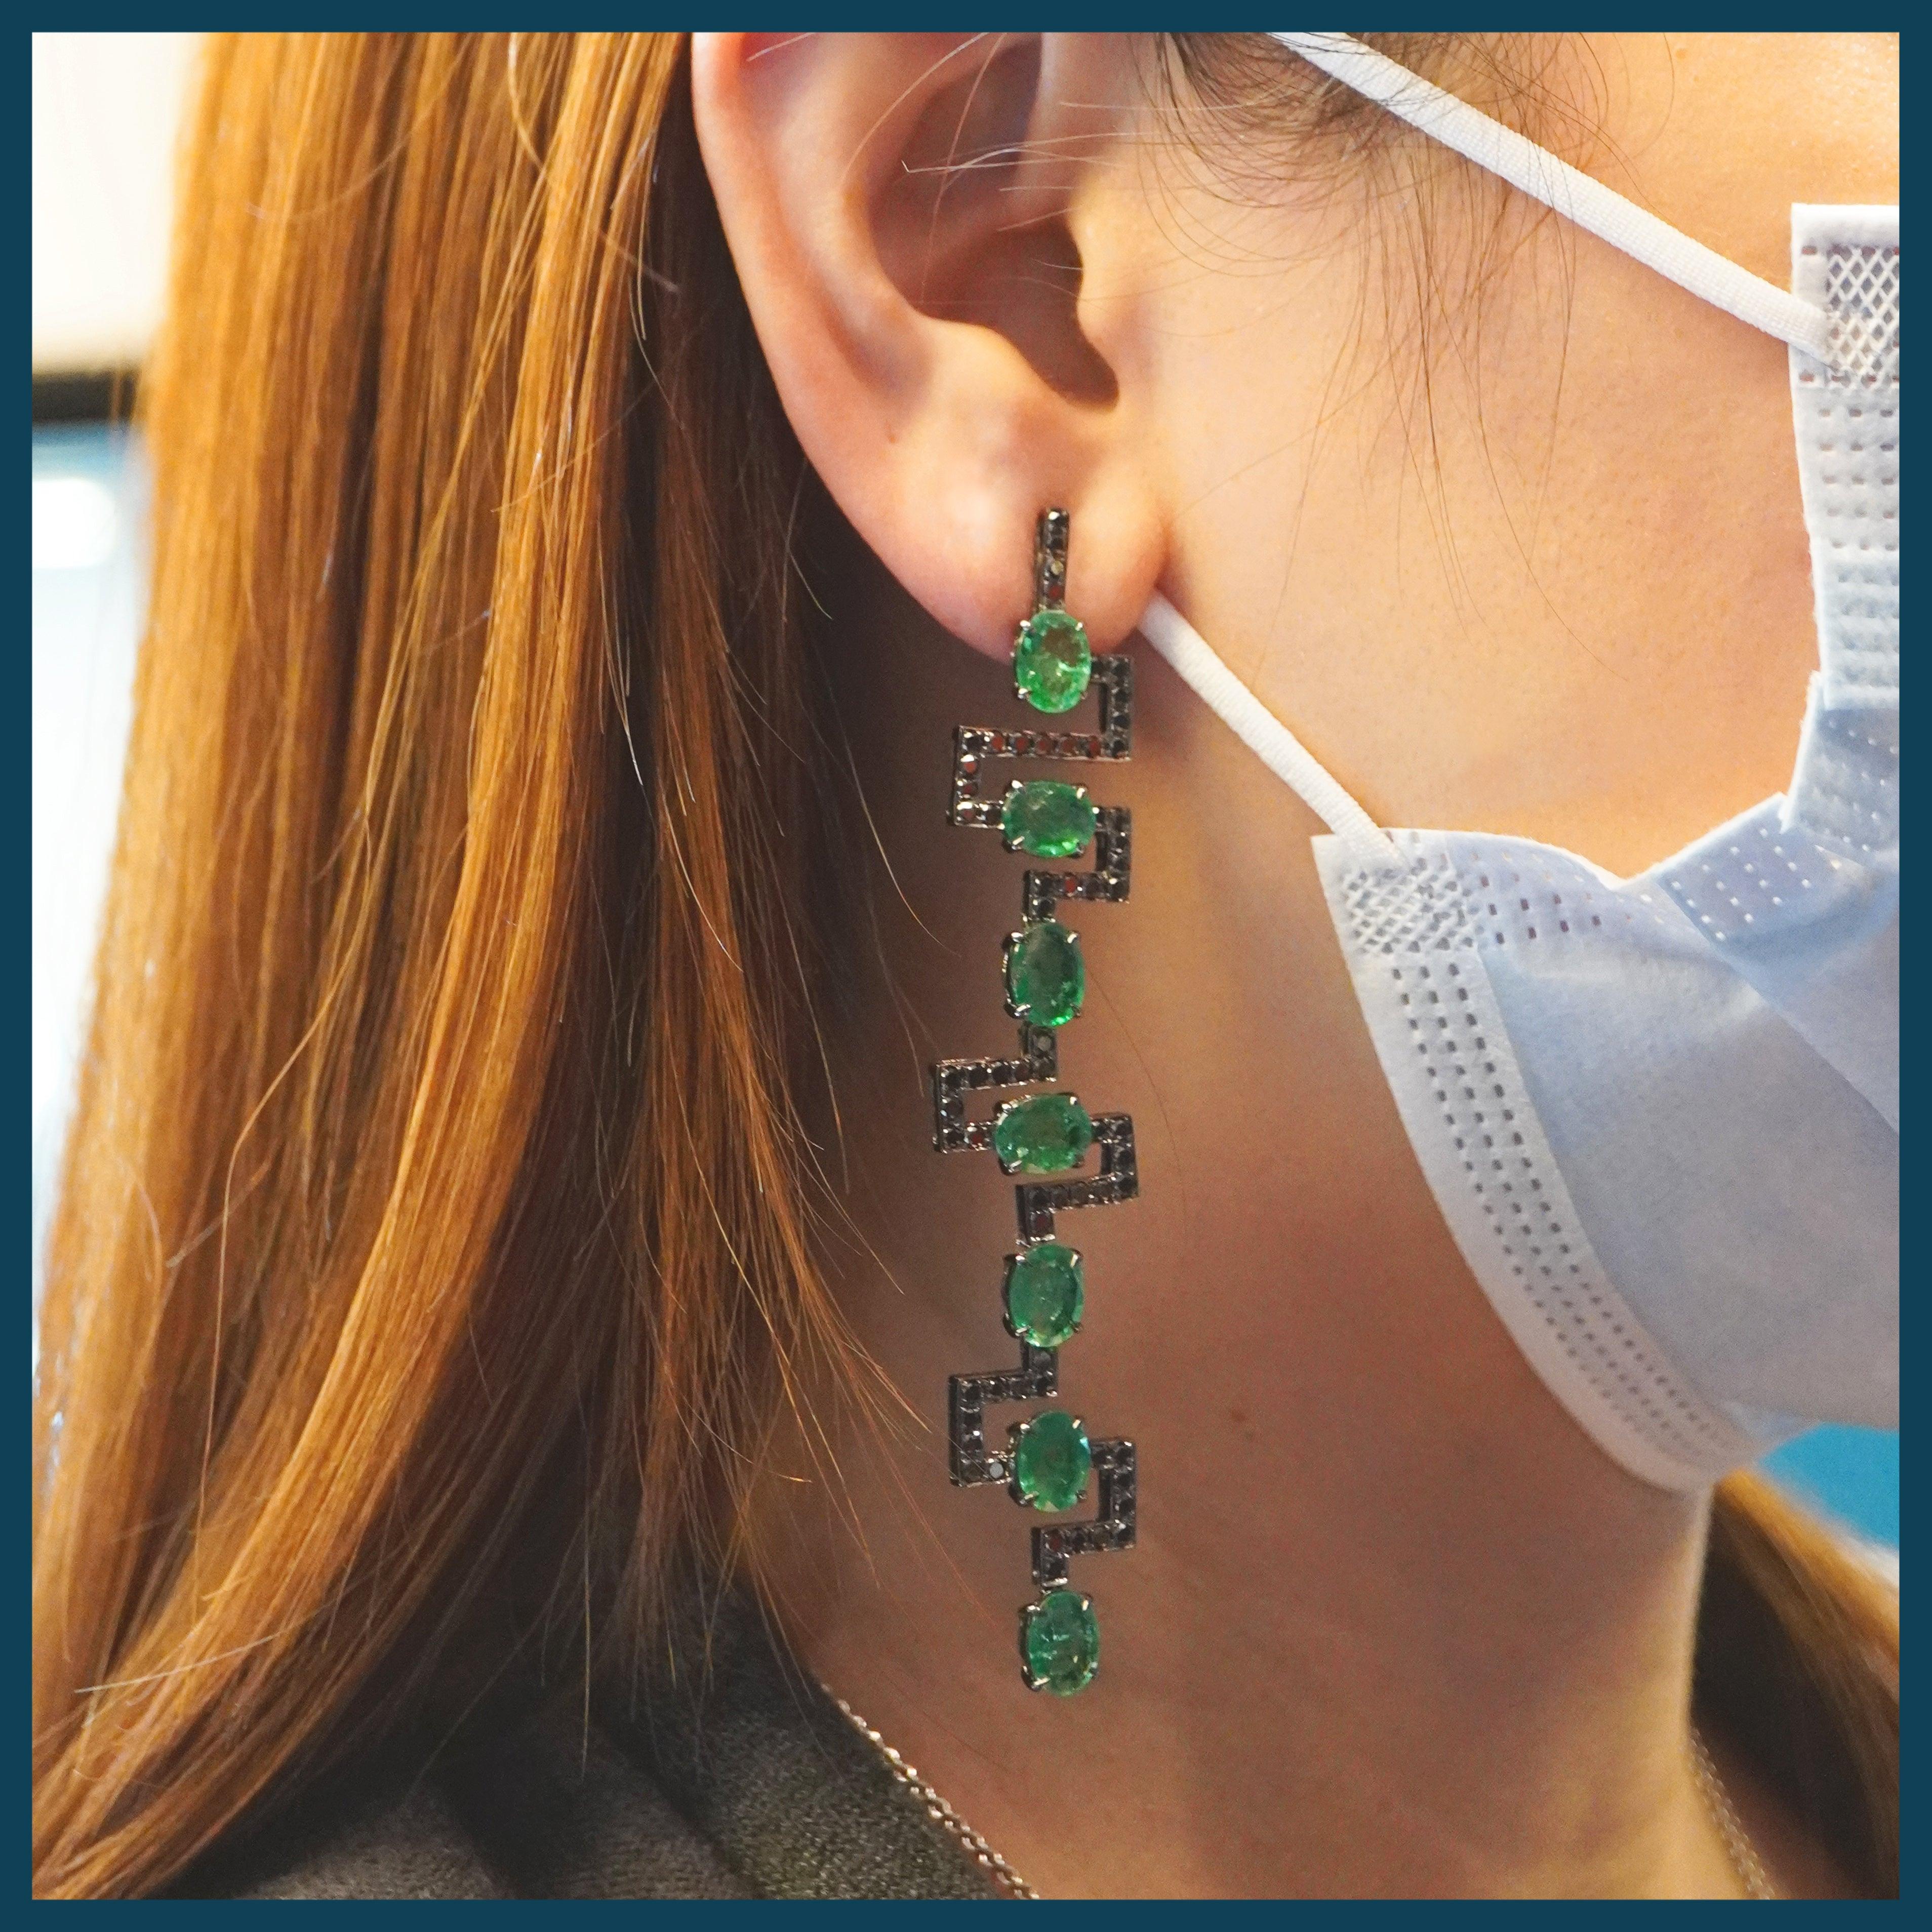 14.56 carat of Colombian emeralds are set along with 2.49 carat black diamond. The Green and black combination is set beautifully in this zig zag earring.
